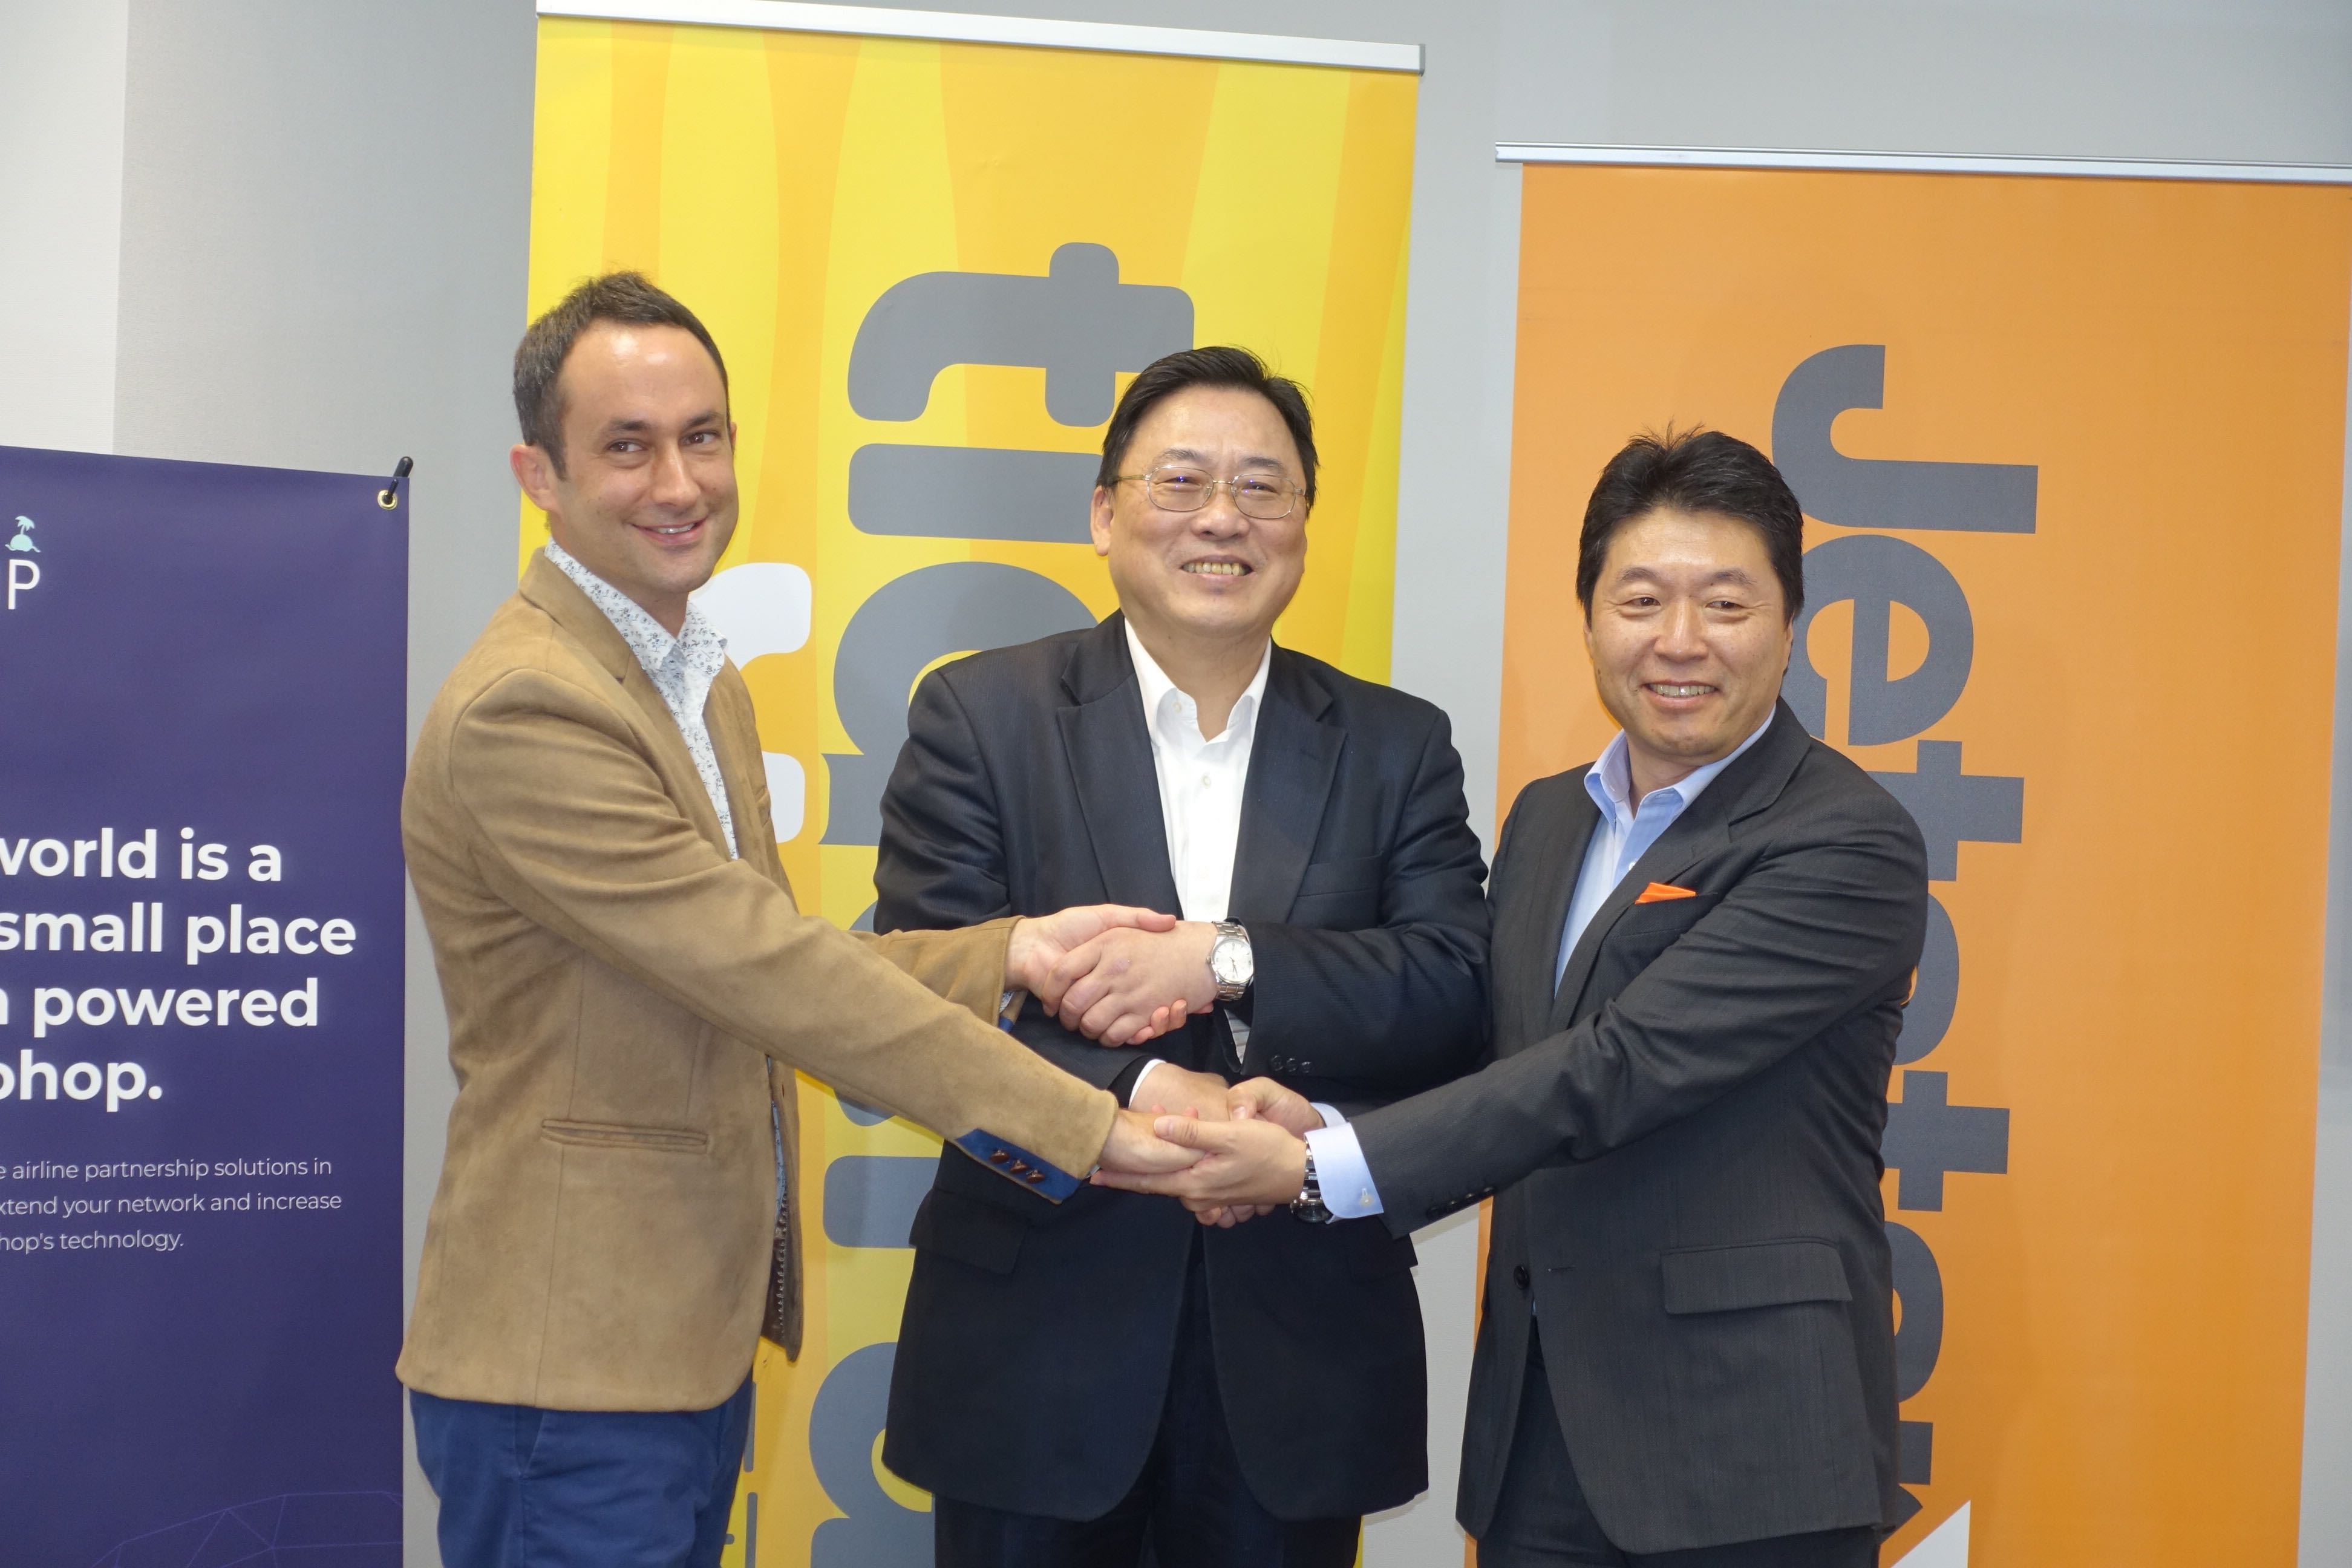 Jetstar and Tiger Air Taiwan sign an interline contract to extend their networks and offer seamless services in Asia